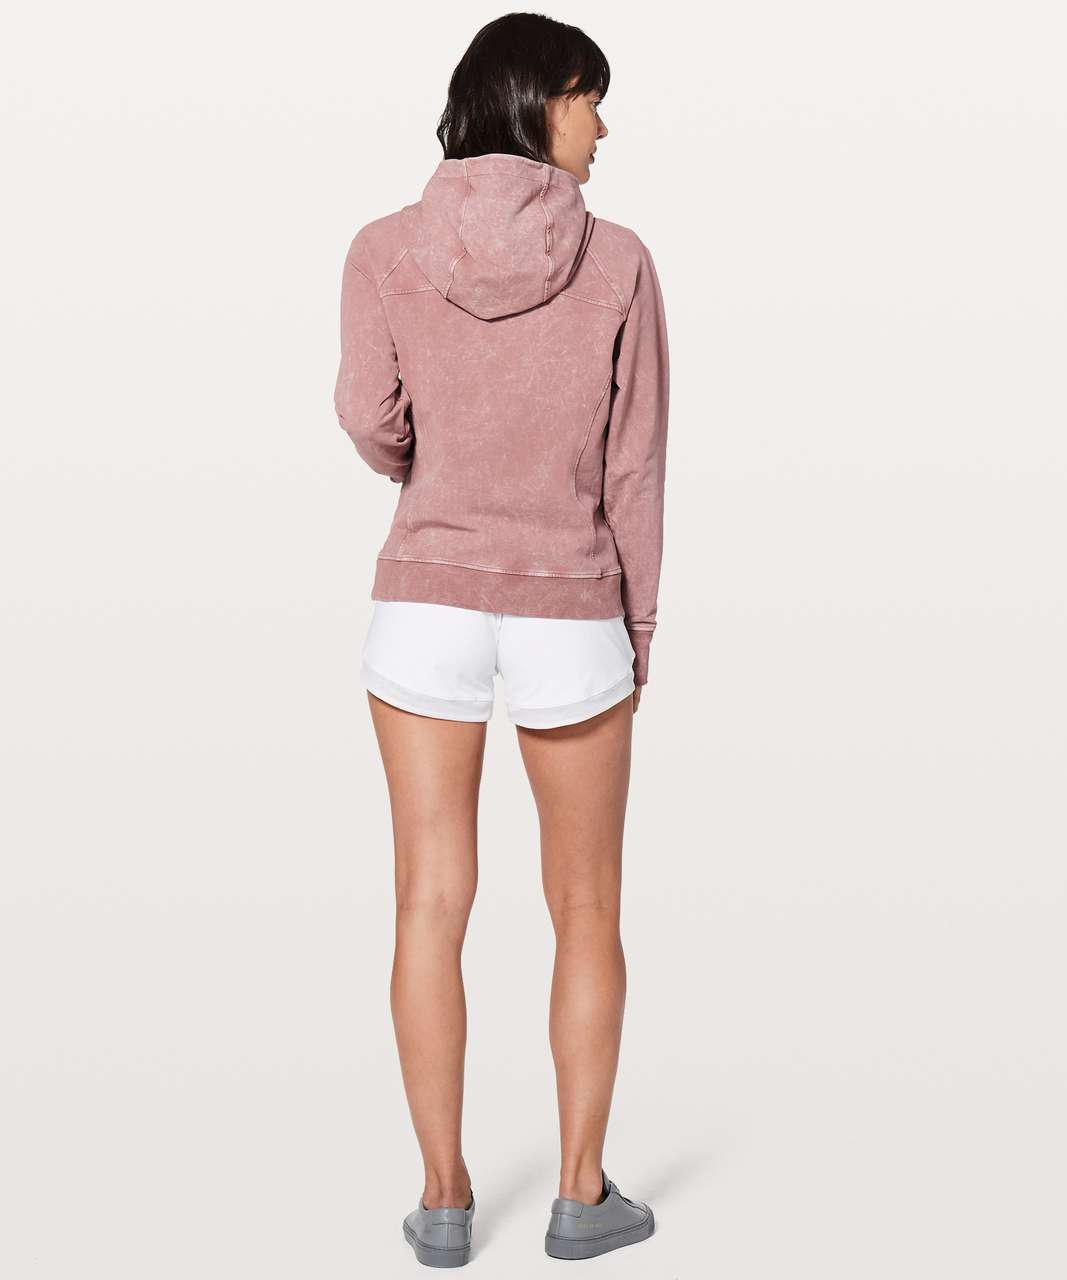 Lululemon Scuba Pullover - Washed Quicksand (First Release)